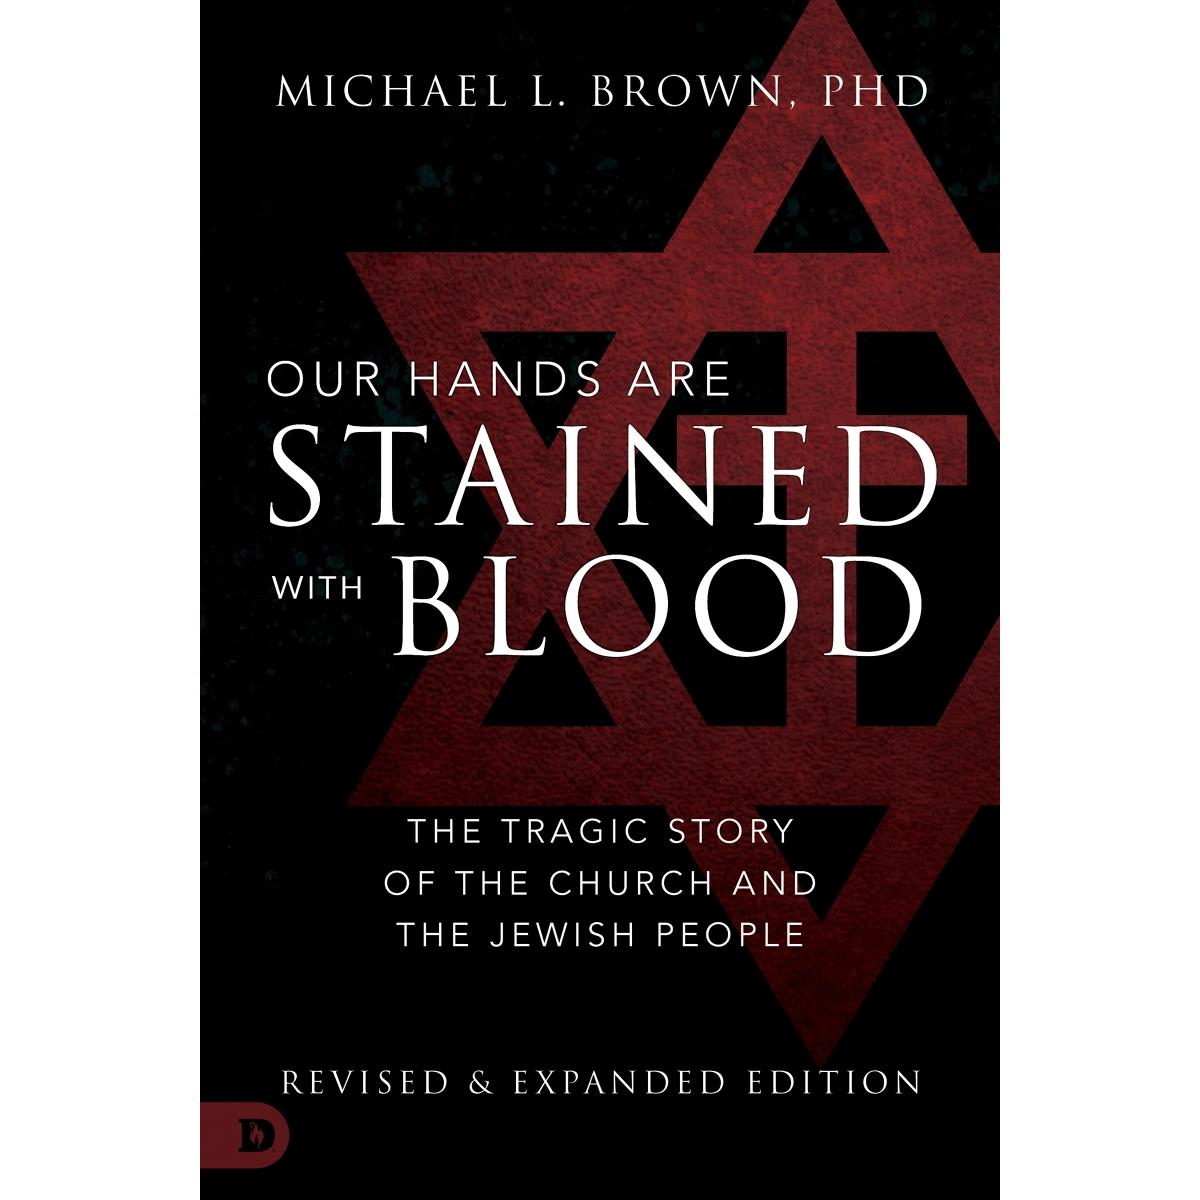 155842 Our Hands Are Stained With Blood - Revised & Expanded